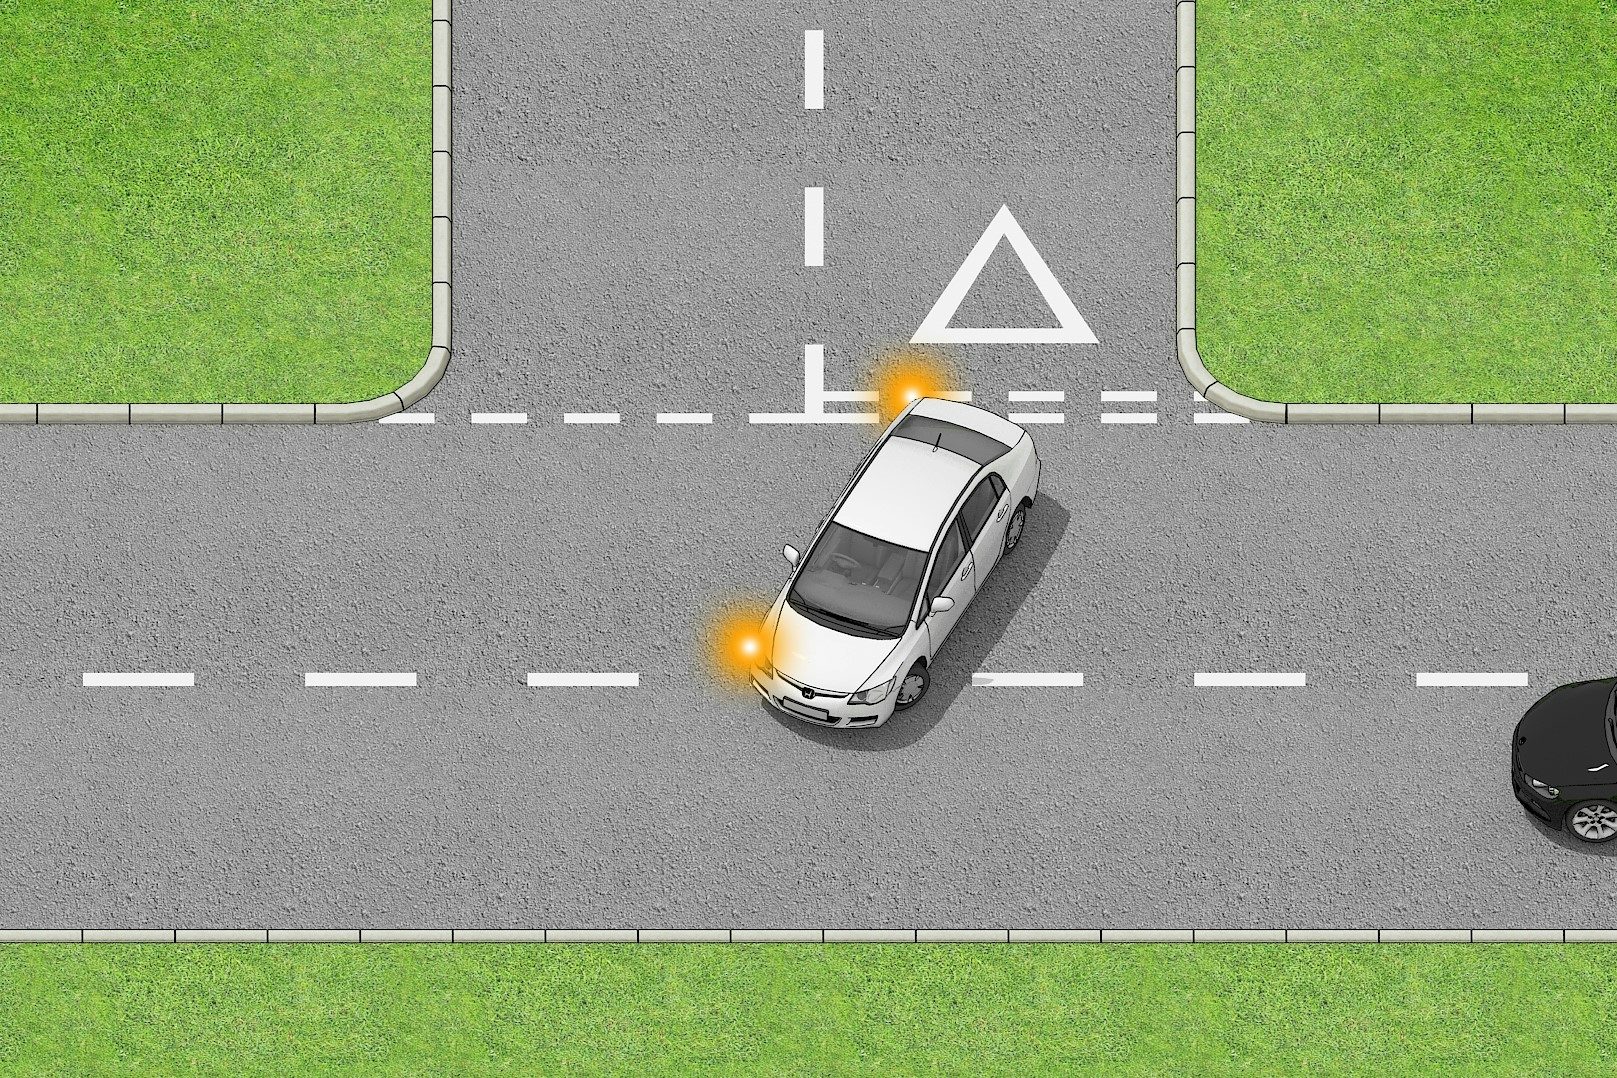 Turning rules, u-turns and 3-point turns